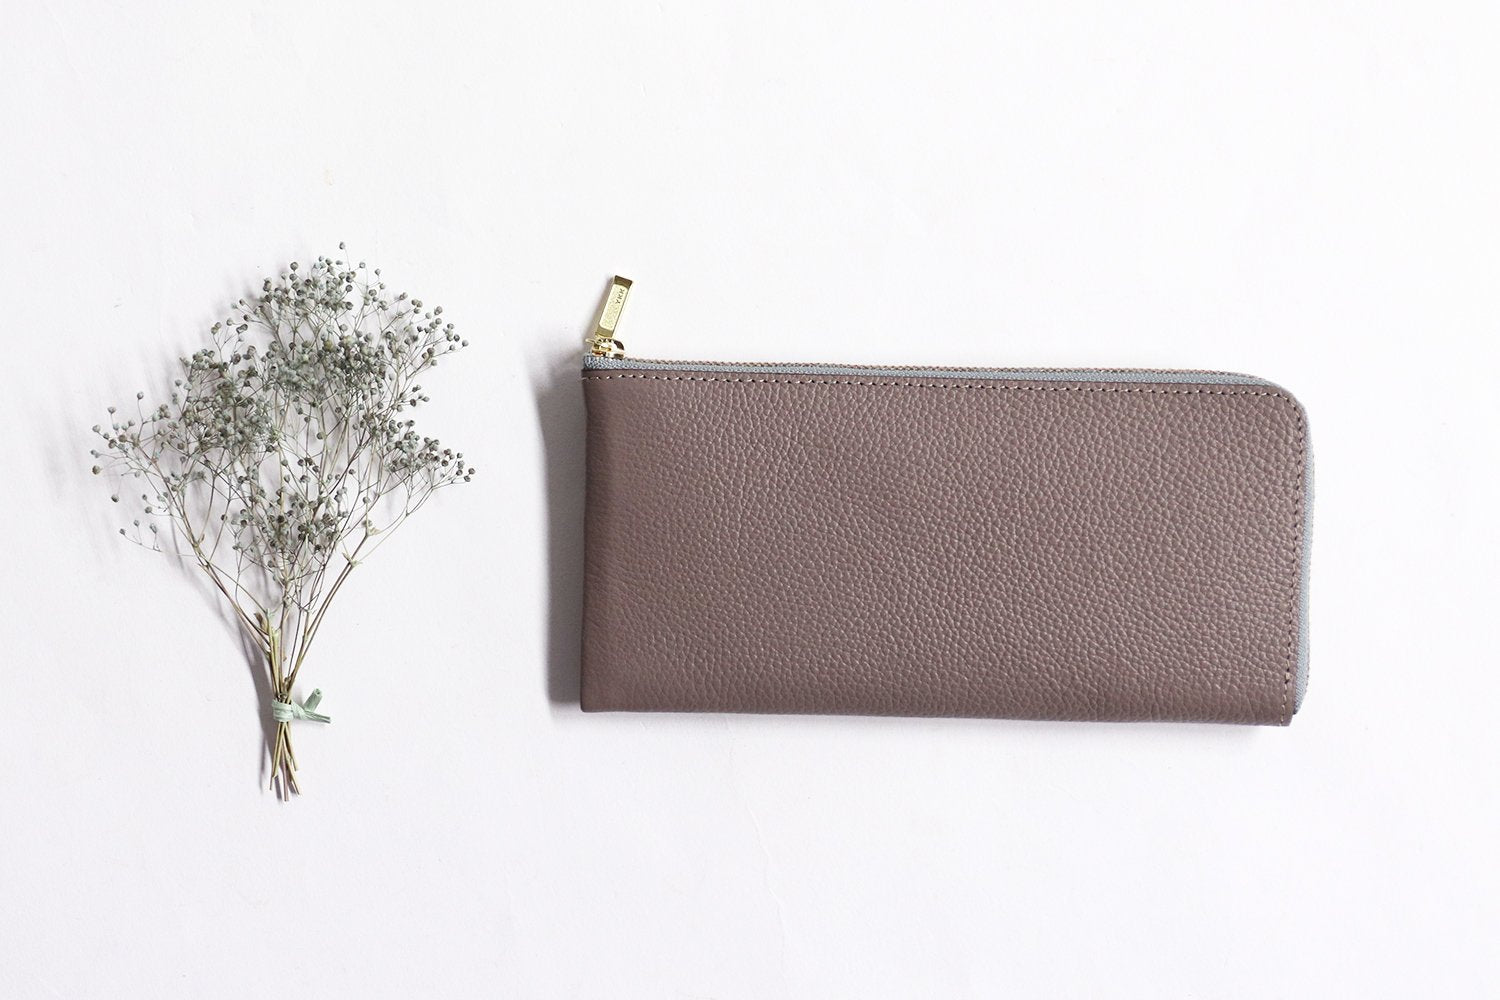 FU-SI FERNALLE / Laviela Slim L zipper long wallet made of high-quality cowhide with a soft touch